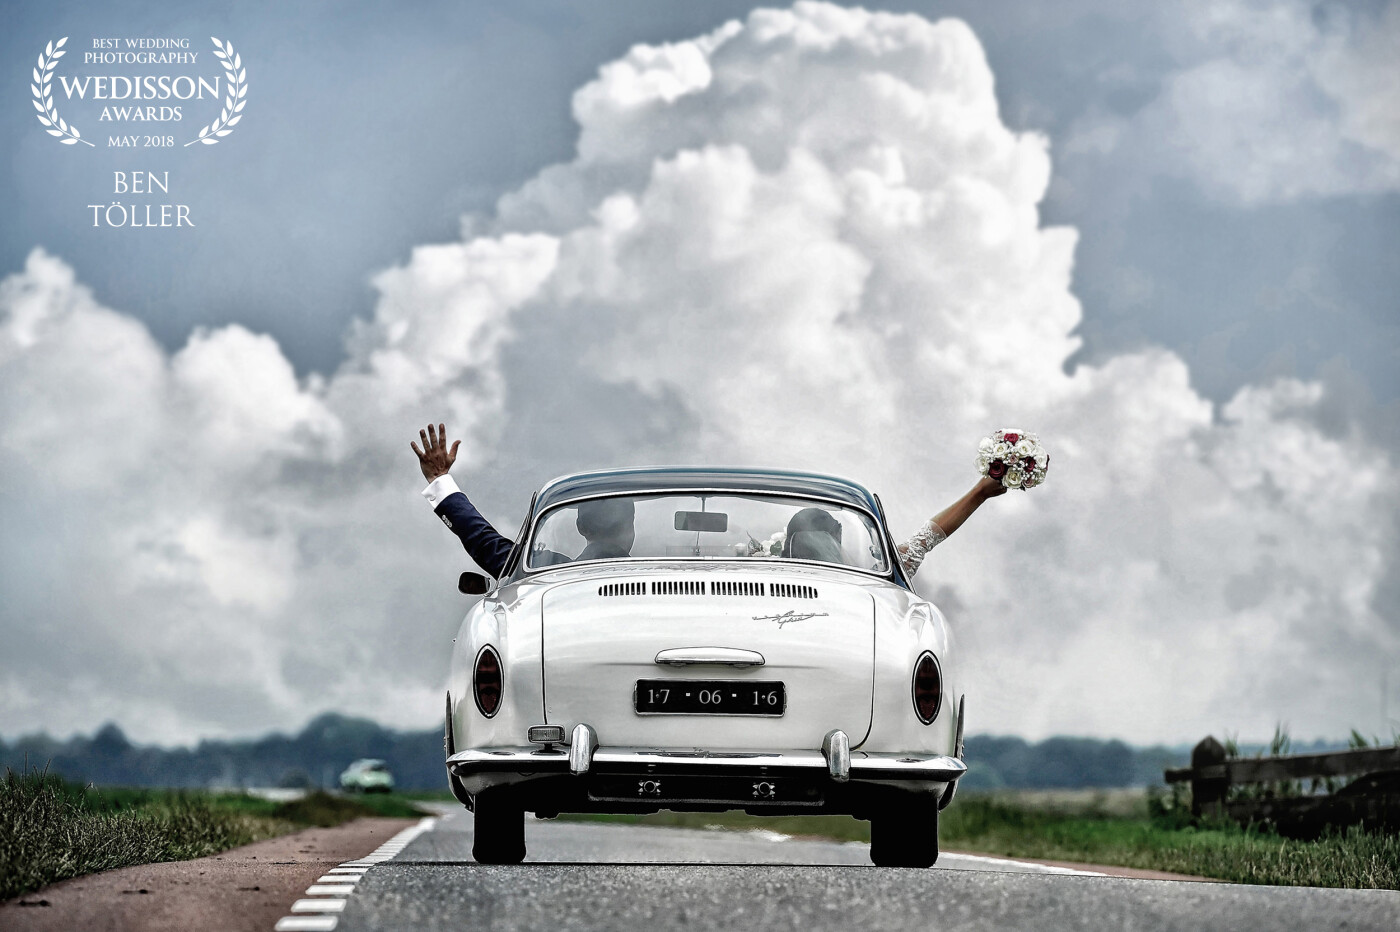 I loved the impressive Dutch clouds and the beautifull car made it to a specila photograph ;-) Those ingedients made this picture. www.bentoller.nl